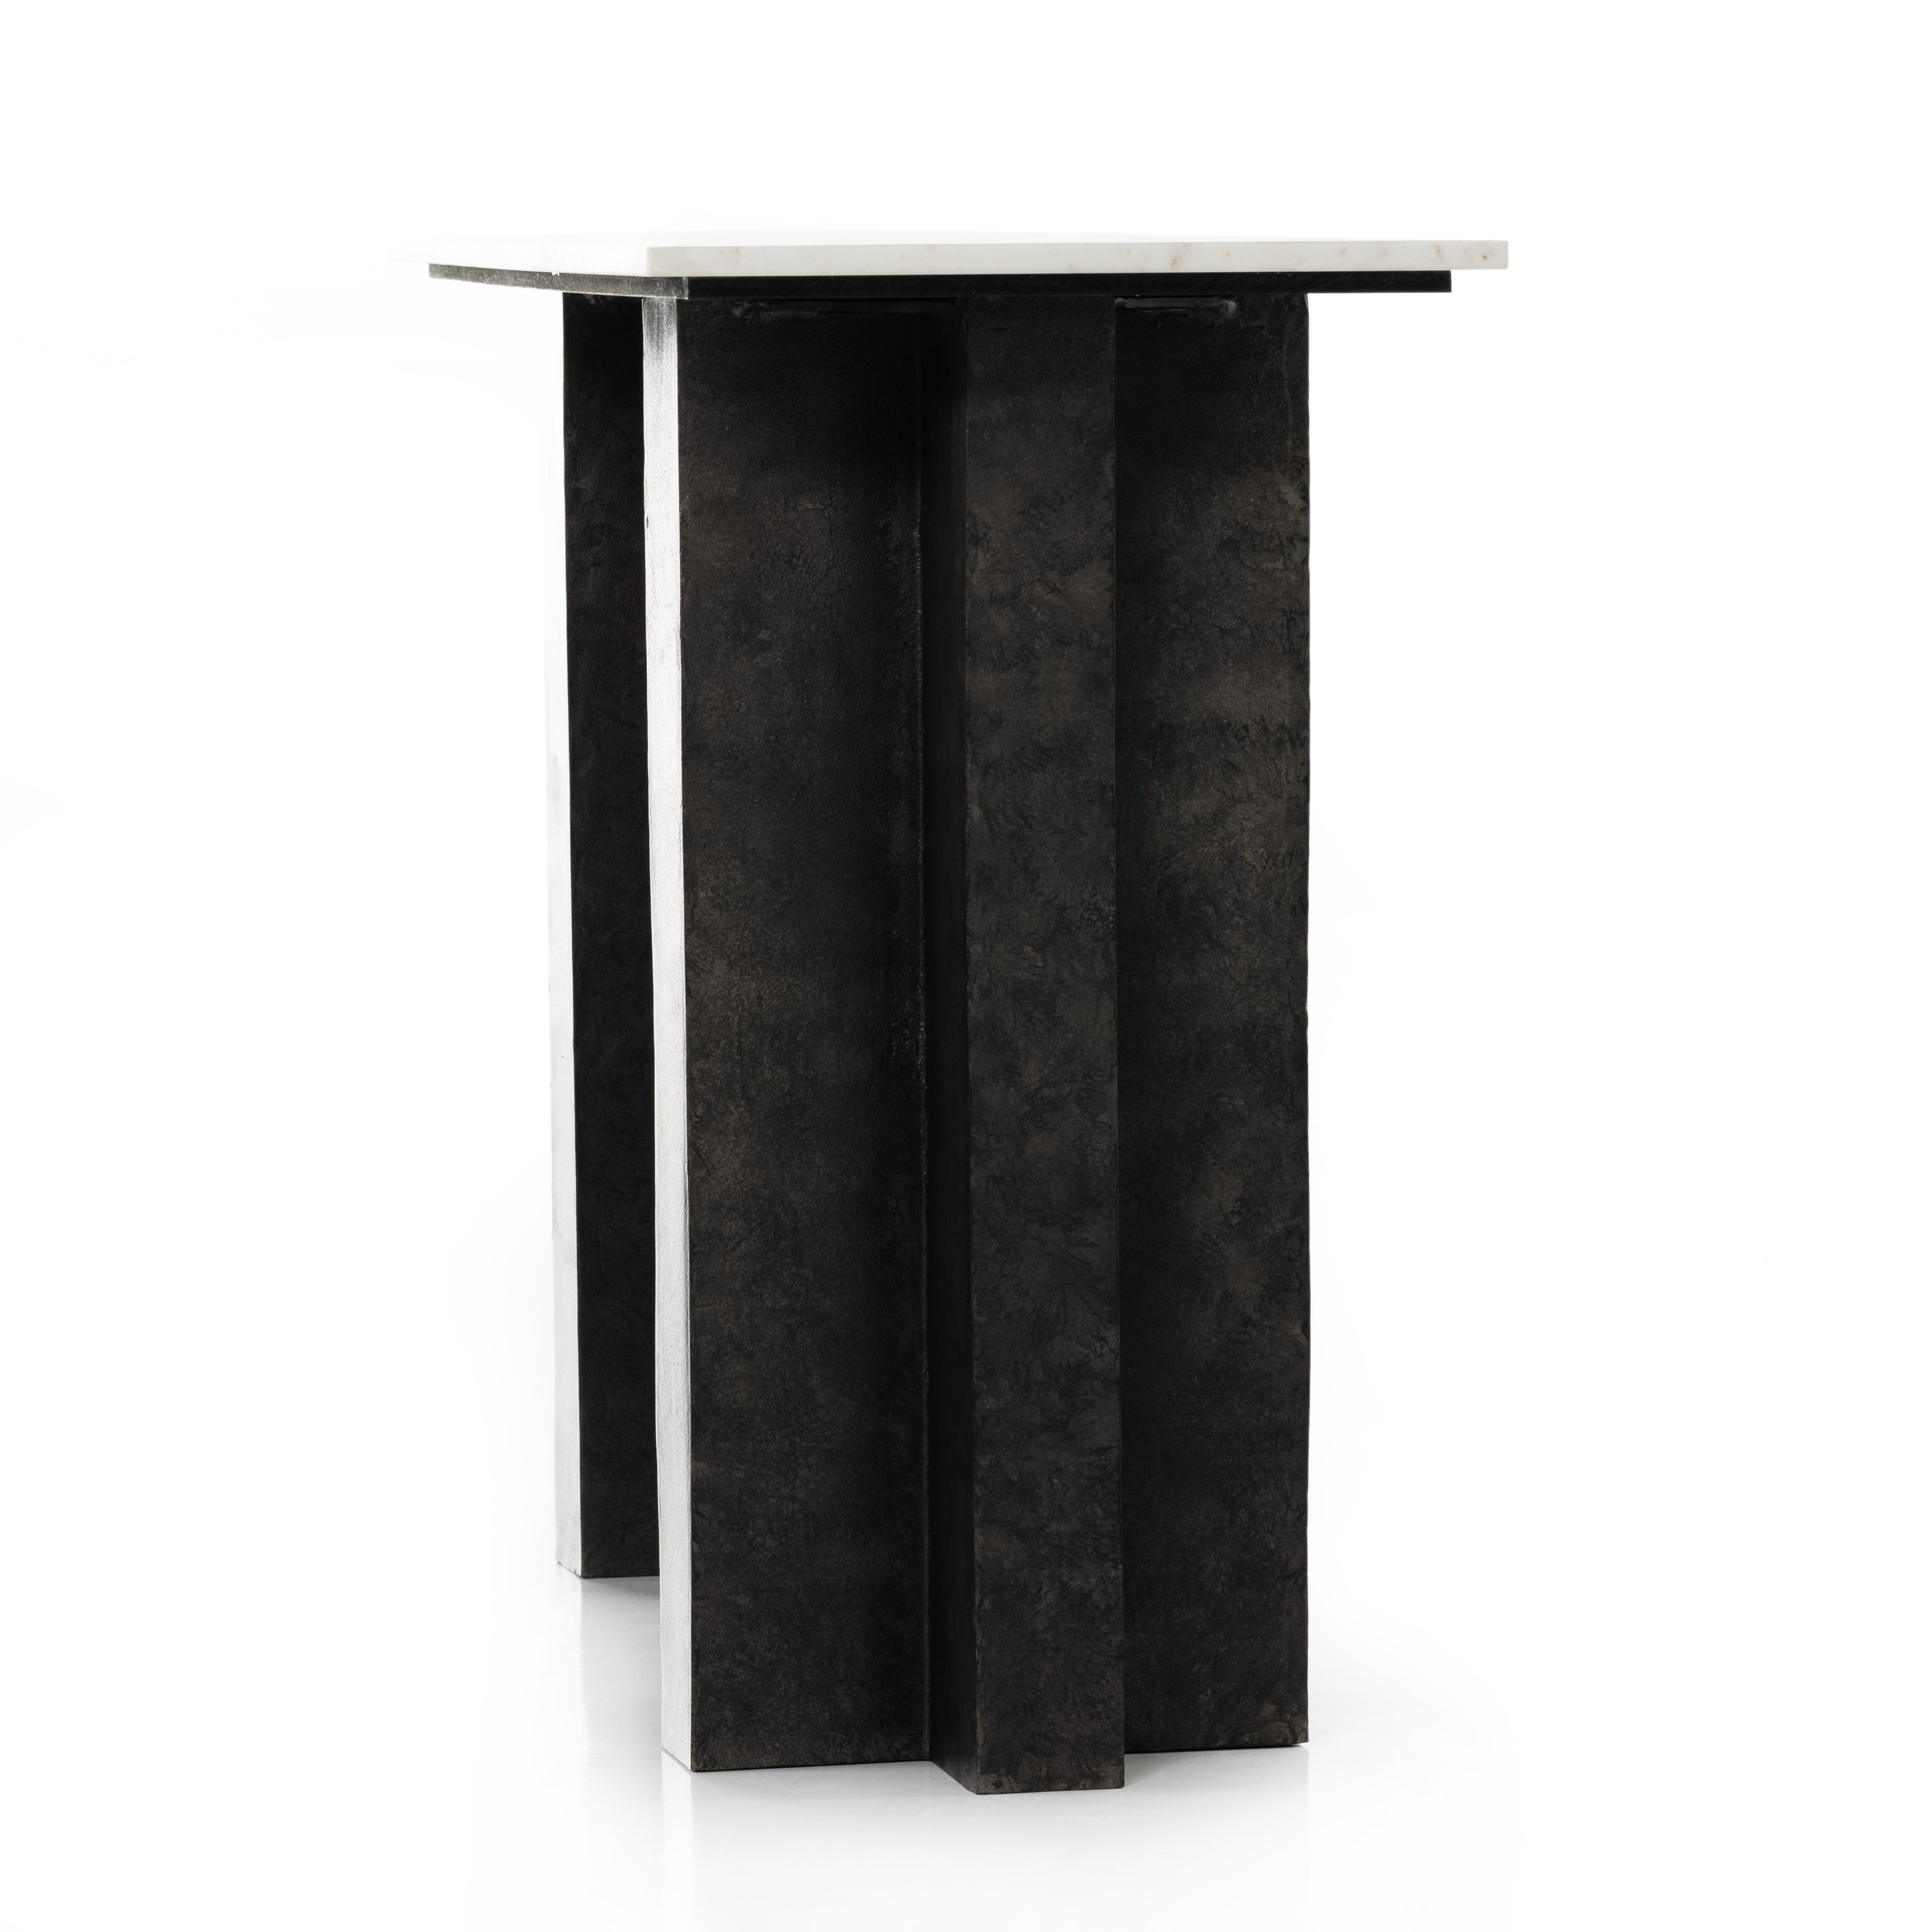 Finished in a raw black, uniquely angular cast aluminum legs, this Terrell Console Table - Raw Black showcases a rectangular tabletop of solid marble in a clean, polished white. We'd love to see this in an entryway or behind a sofa.   Overall Dimensions: 51.00"w x 17.00"d x 31.25"h